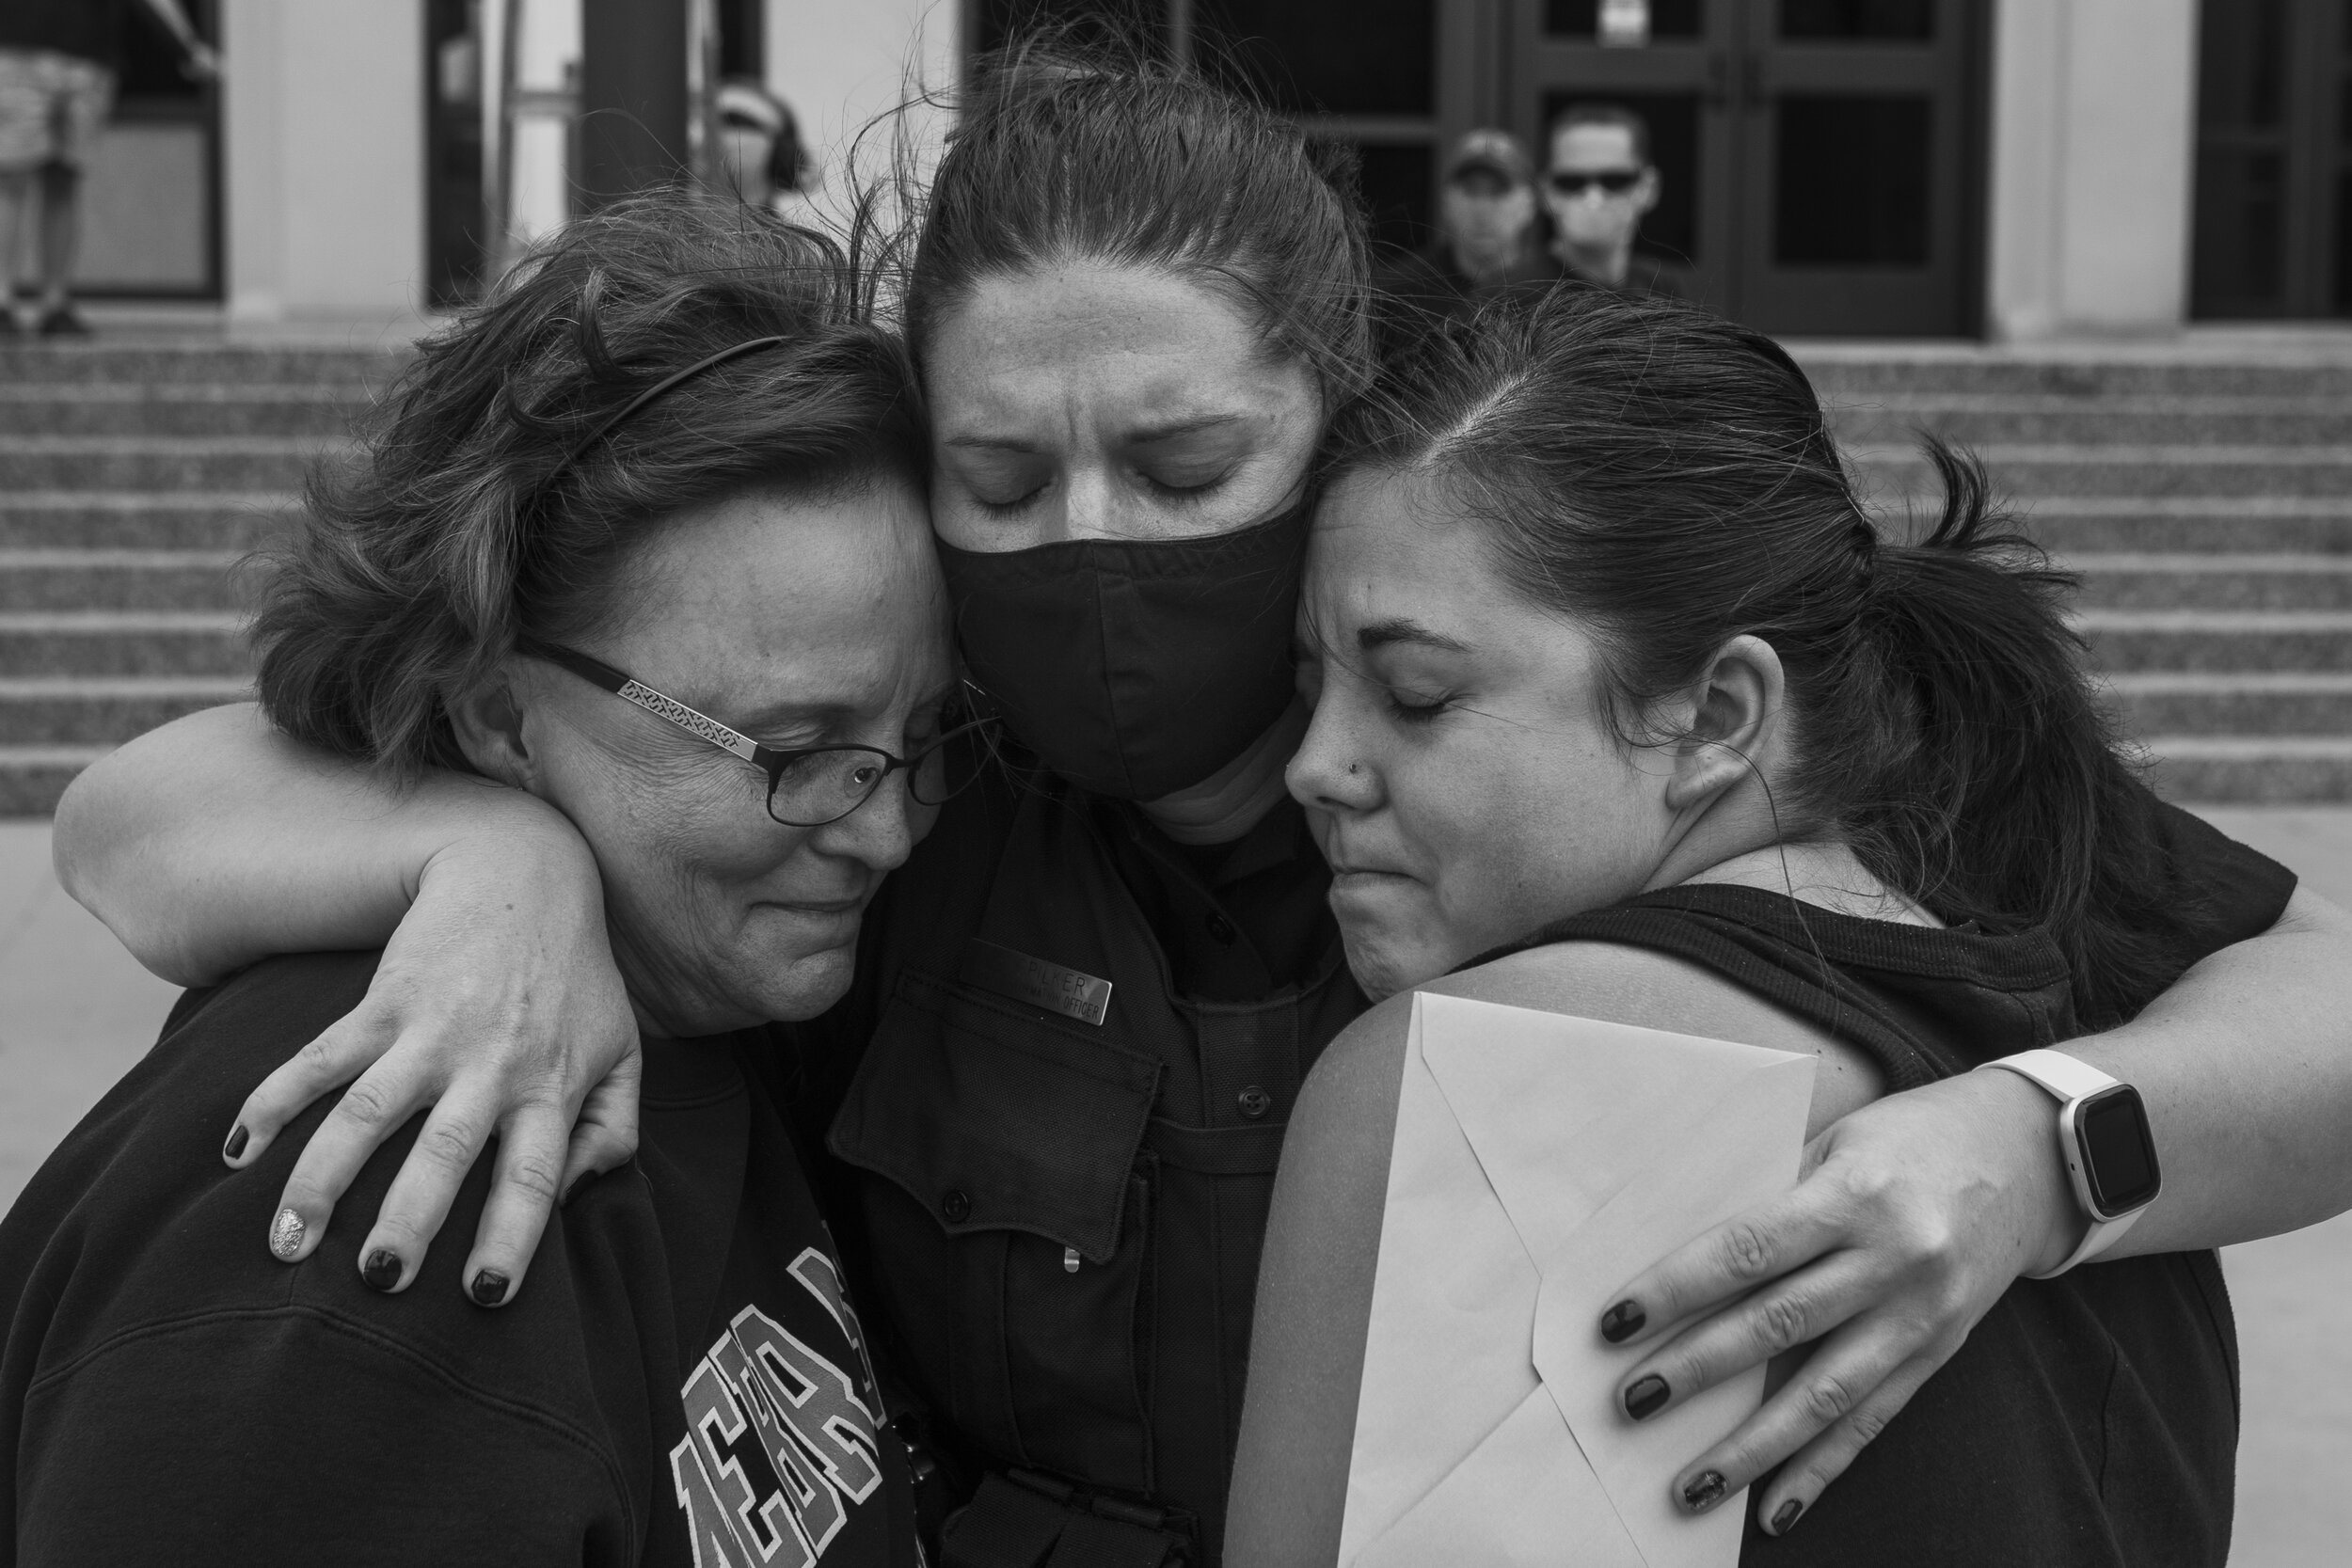  PIO officer Erin Spilker (center) is hugged by two people who did not offer their names during a funeral procession for fallen officer Mario Herrera  on Monday, September 7, 2020, in Lincoln, Nebraska. Herrera passed away in the early hours of Septe